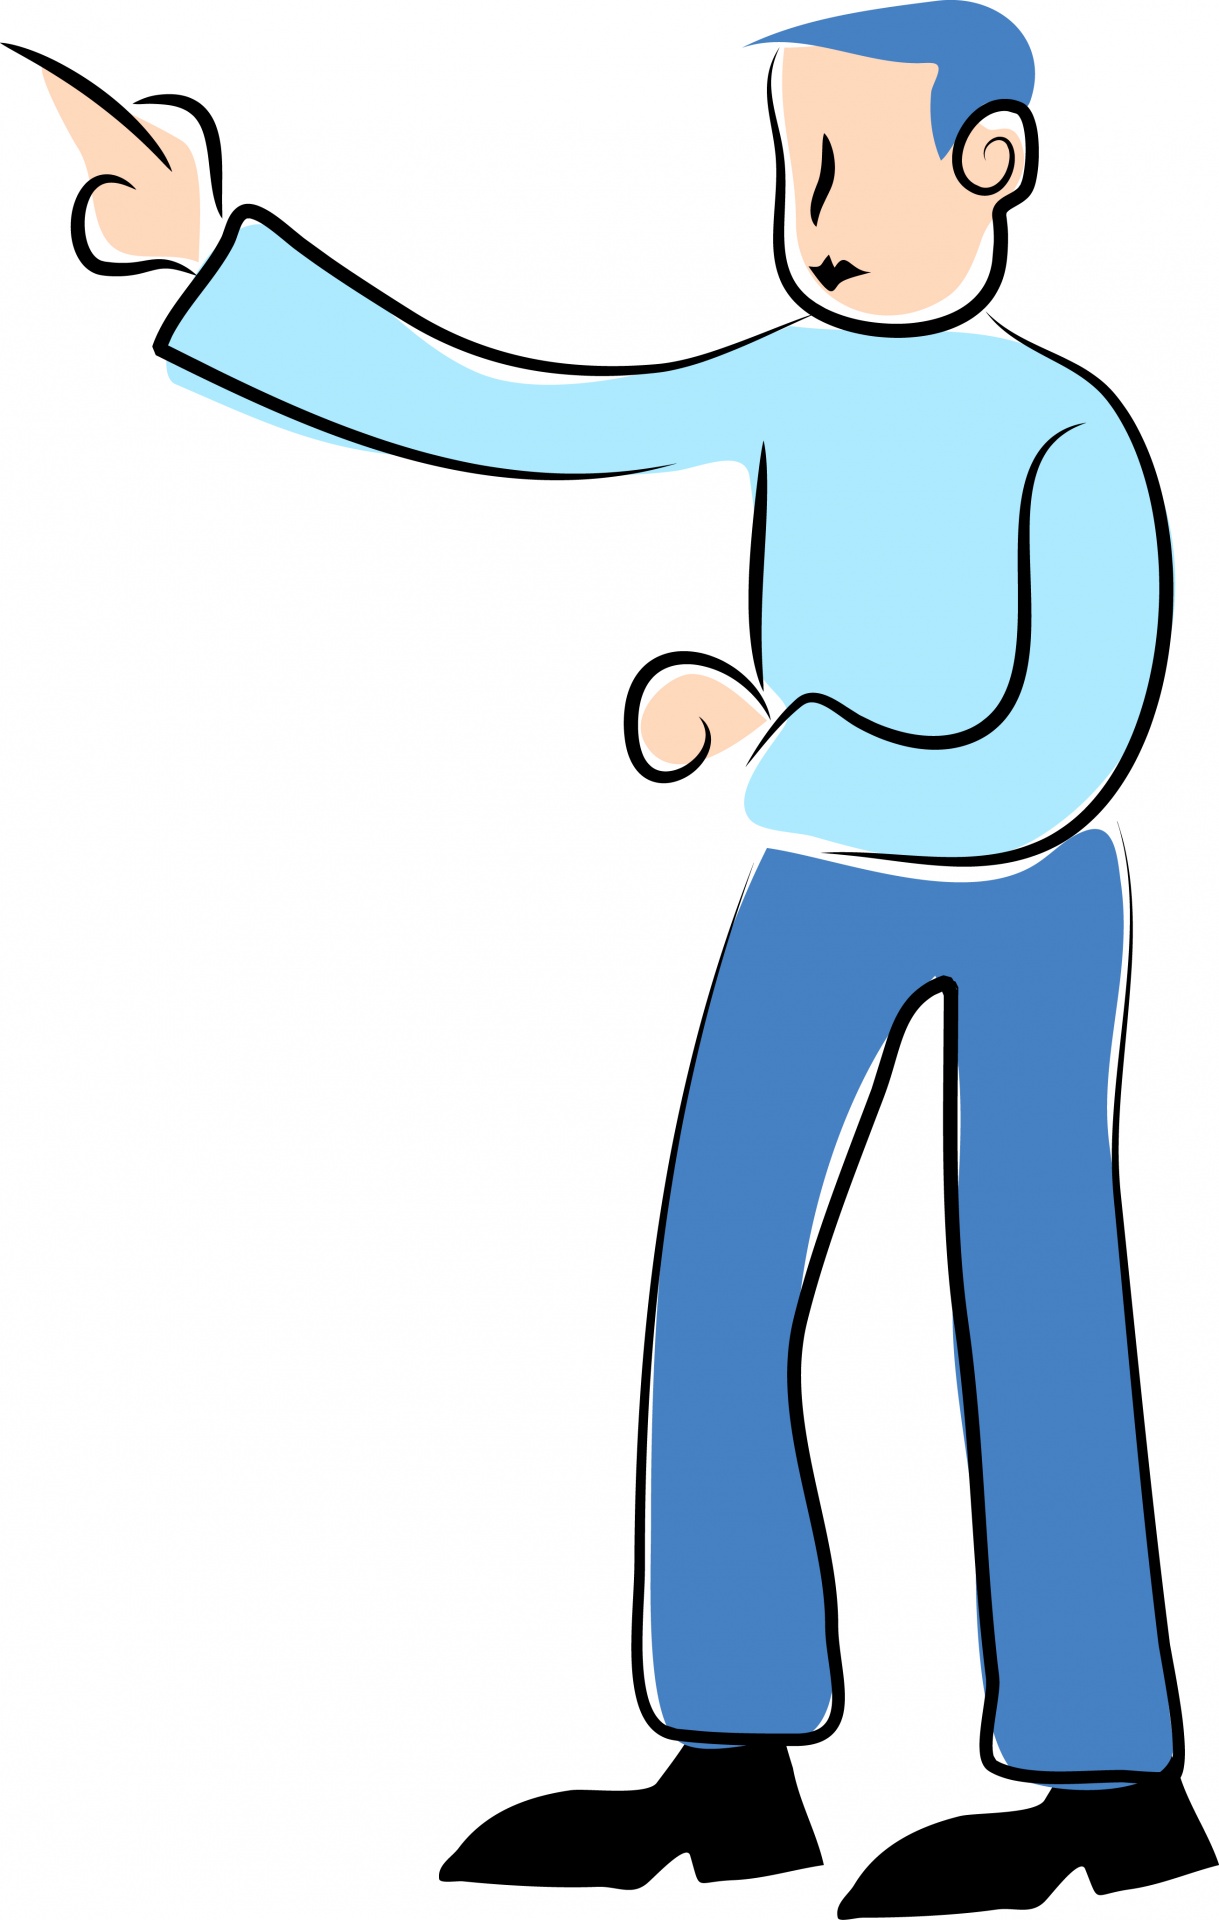 Clip art illustration graphic. Pointing clipart person